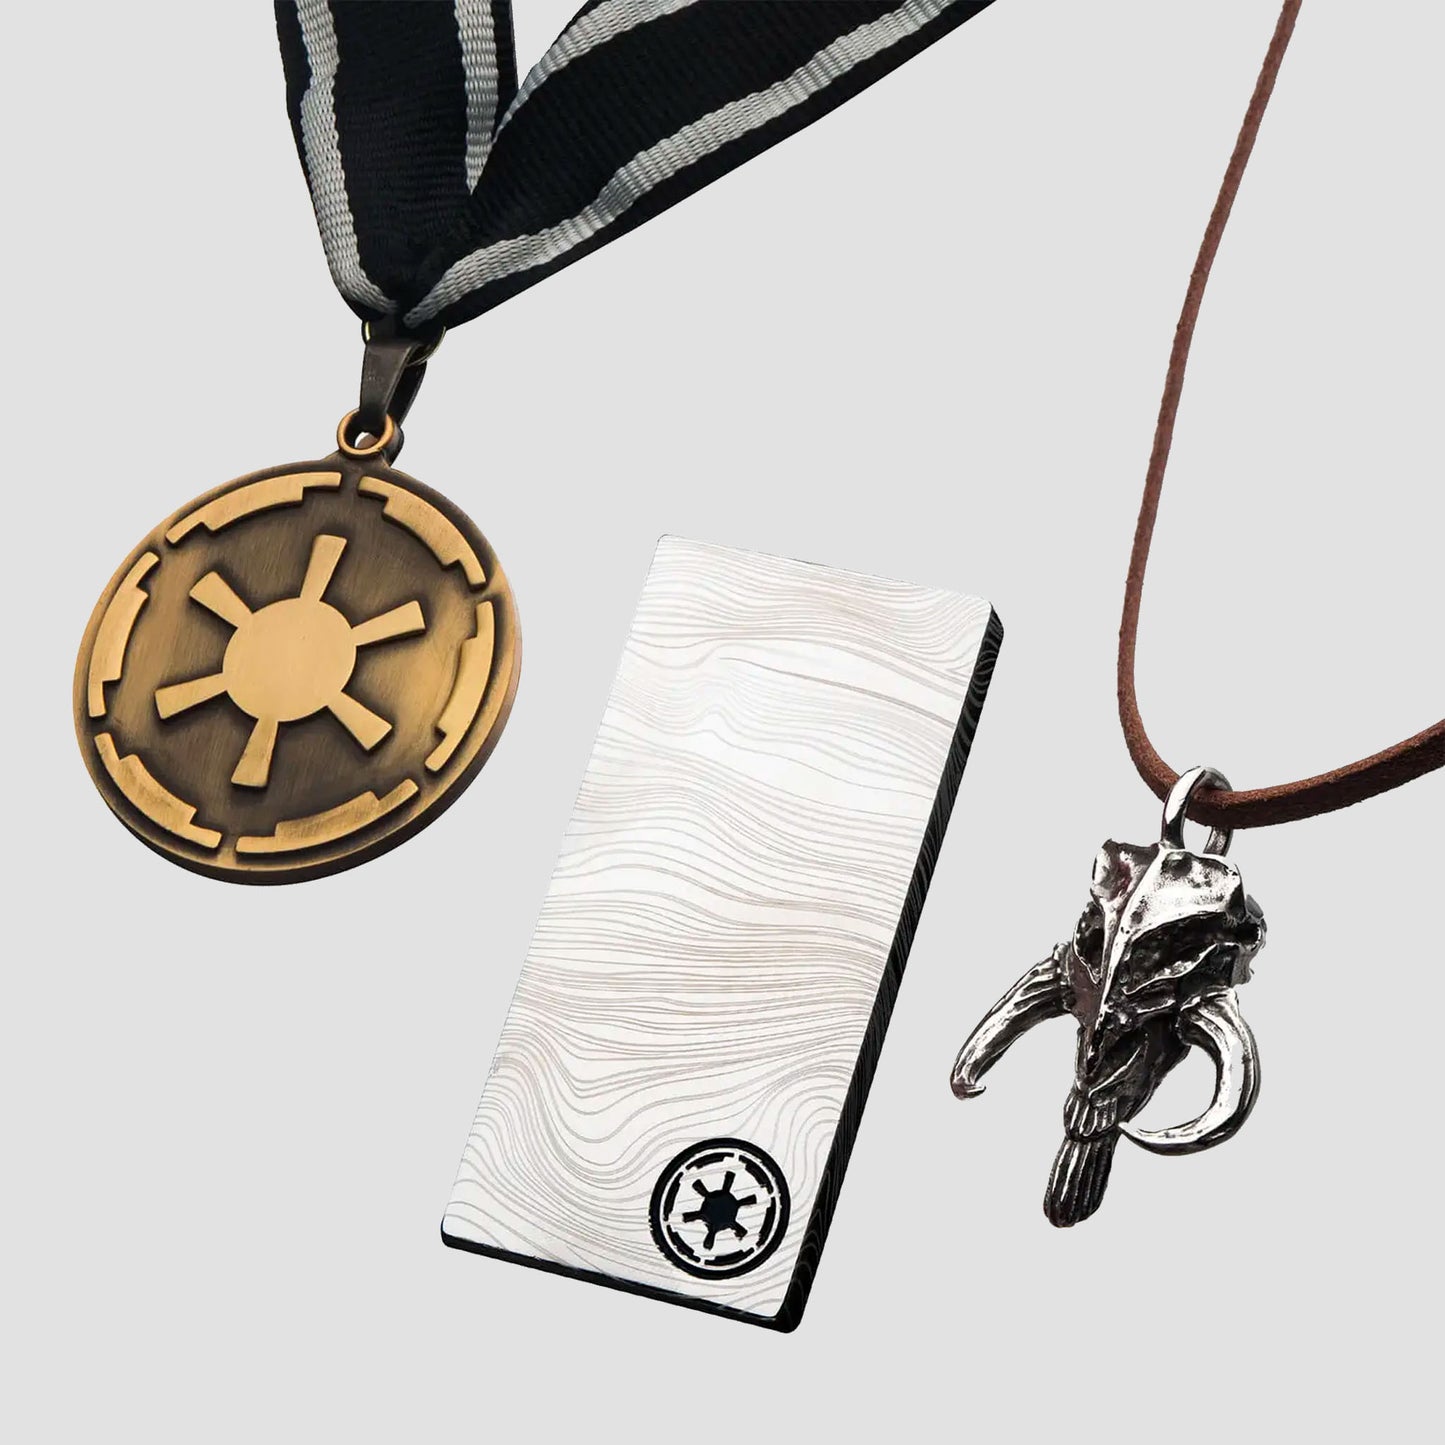 Rey Accessories, Galactic Empire Starr-Wars Necklace | reycostume.com